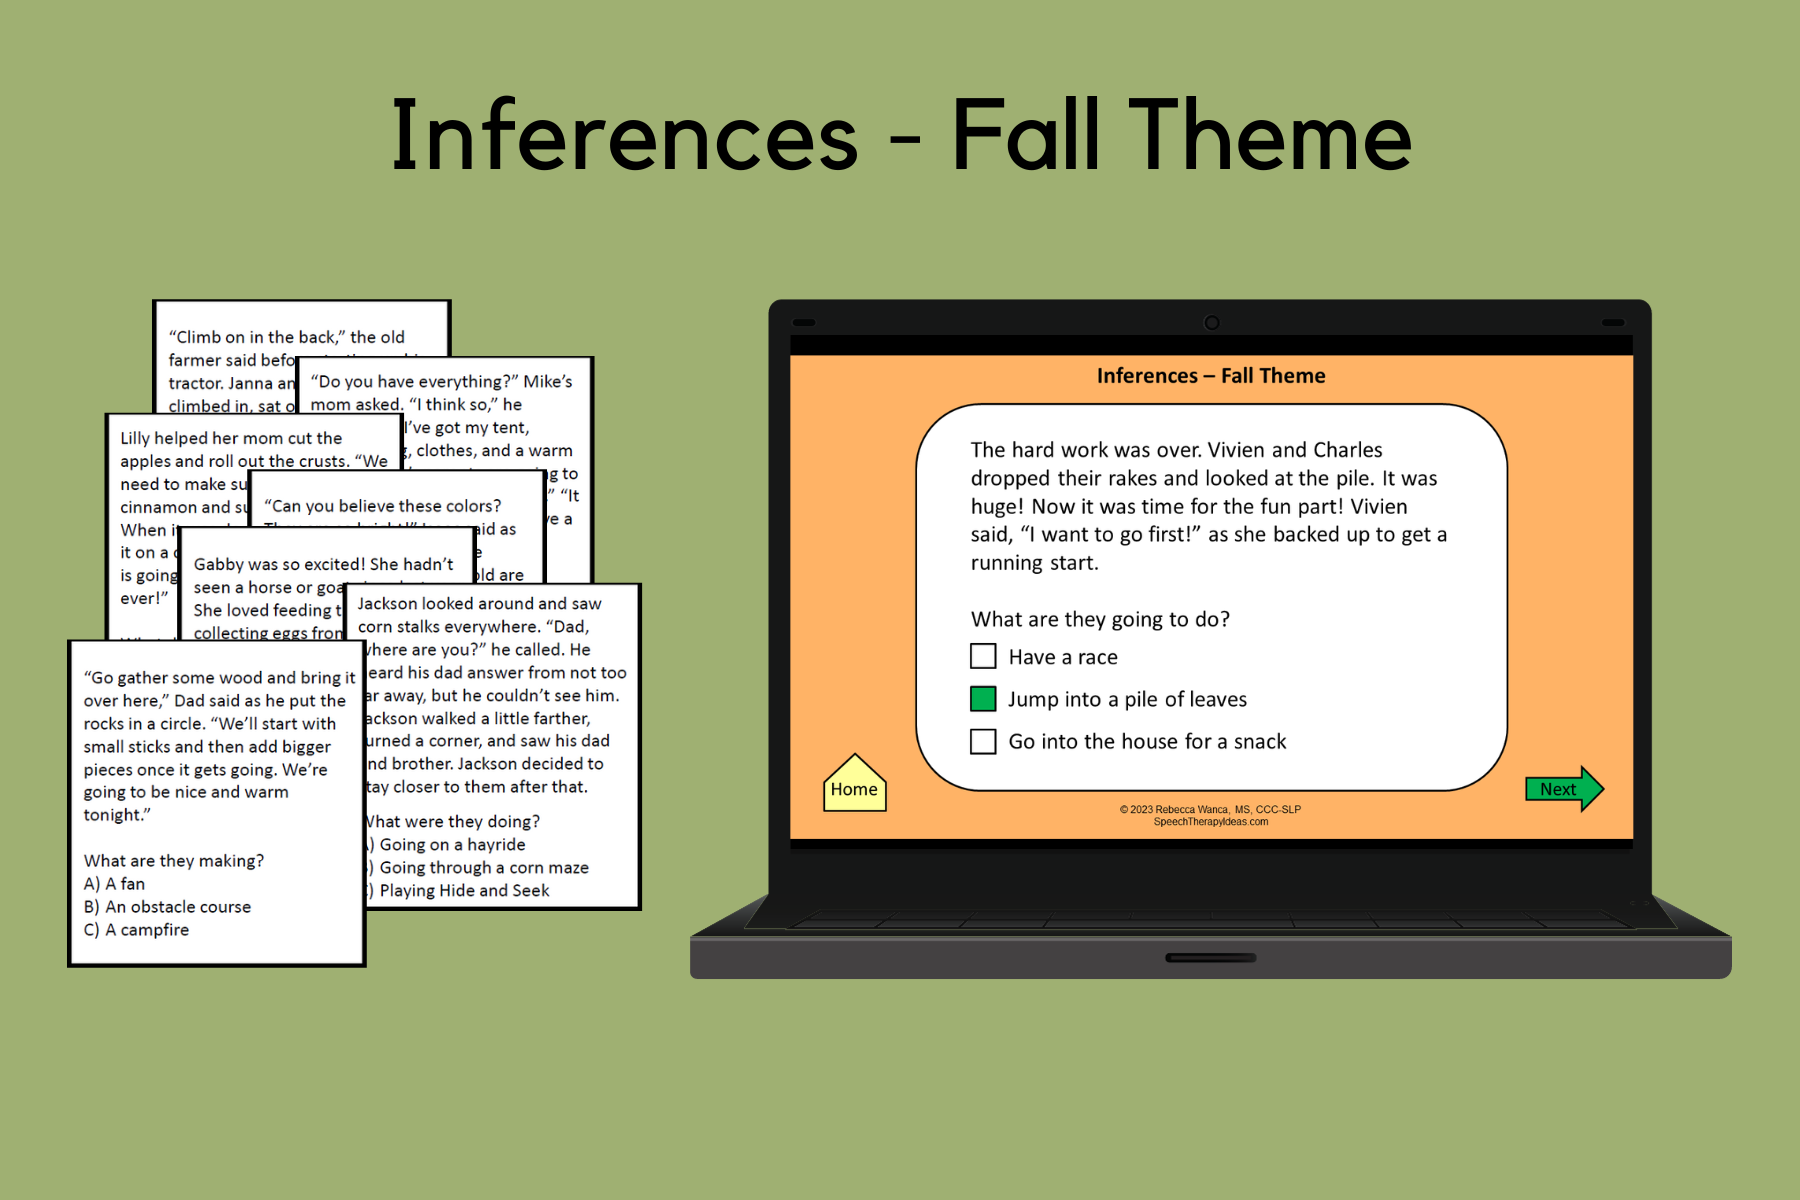 Inferences – Fall Theme